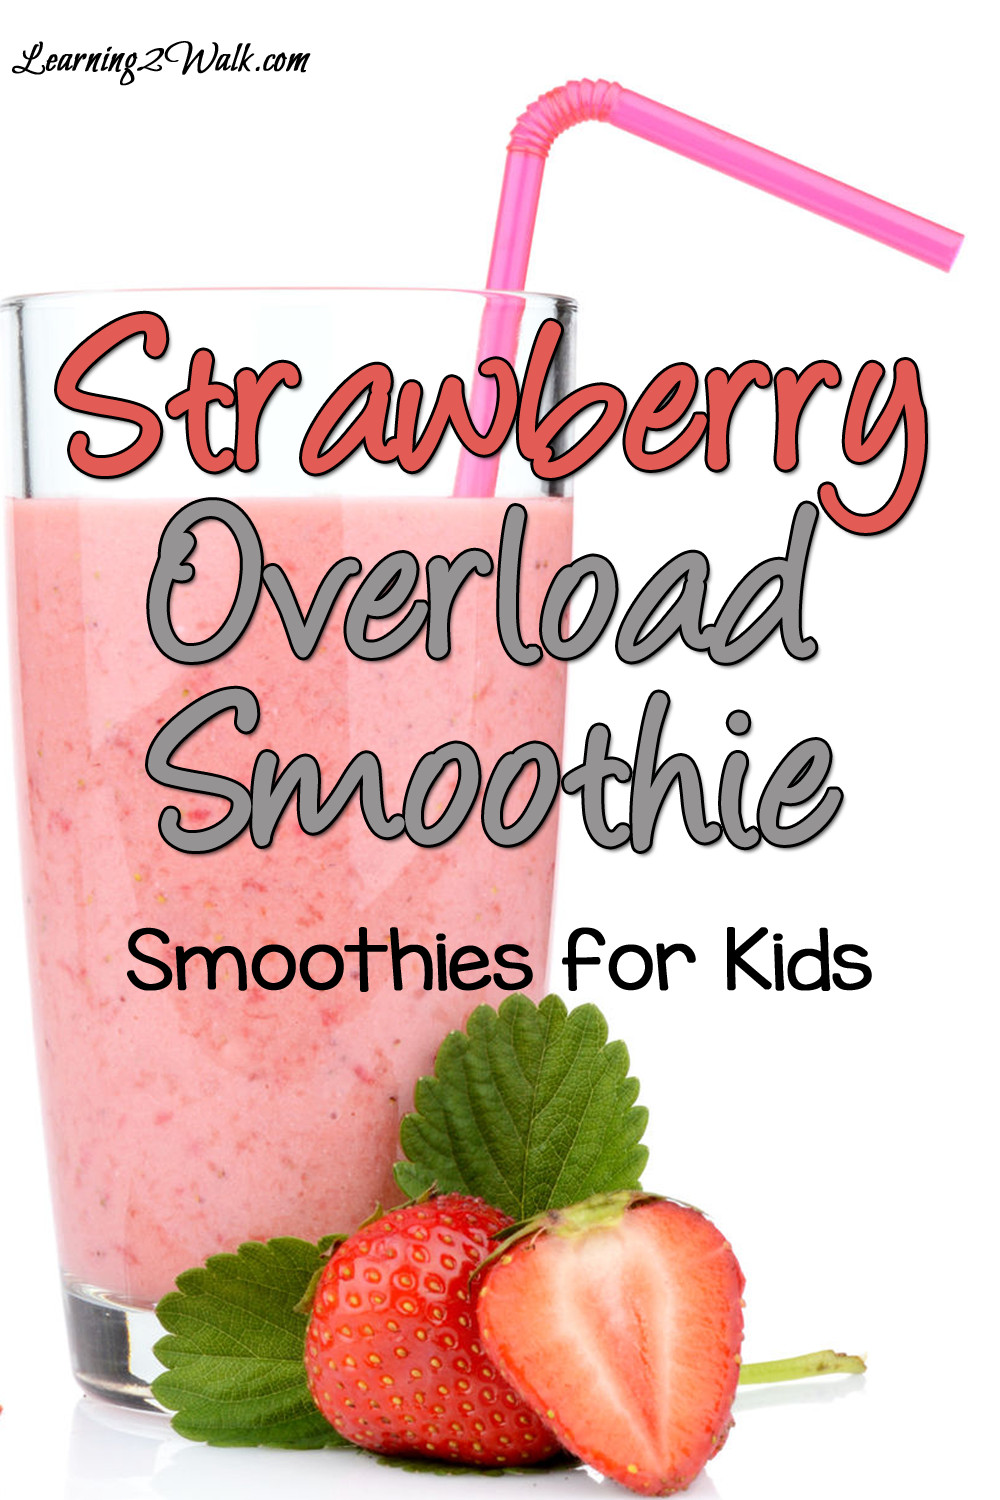 Smoothies For Kids
 Smoothies for Kids Strawberry Overload